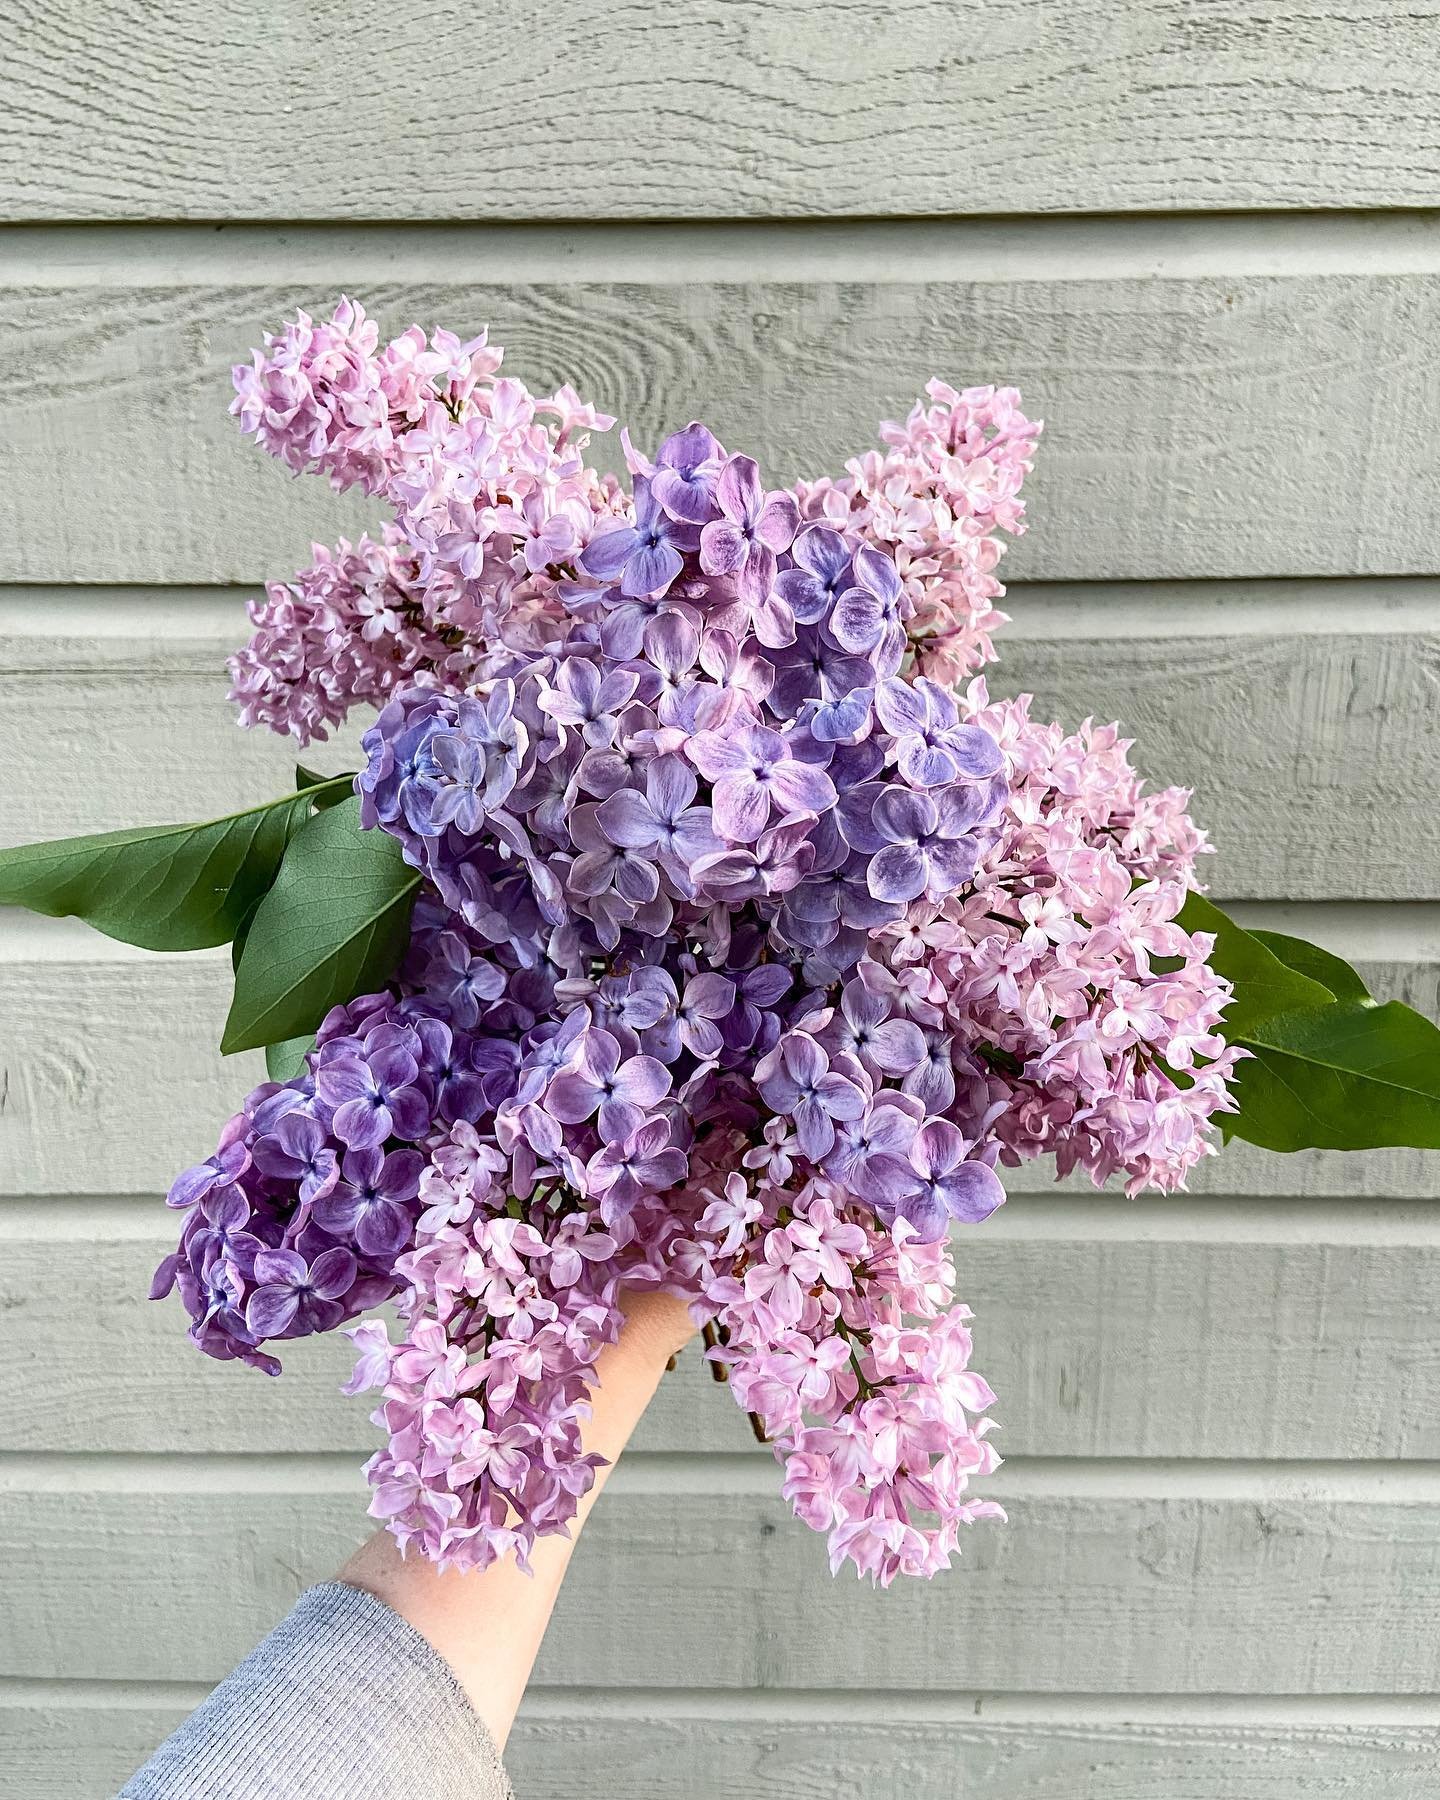 Growing up, we had a huge lilac tree beside our house - my  Mom would cut the flowers multiple times through the season and bring them in the house. The smell was amazing and the colour was beautiful. It&rsquo;s one of my cherished memories and as I 